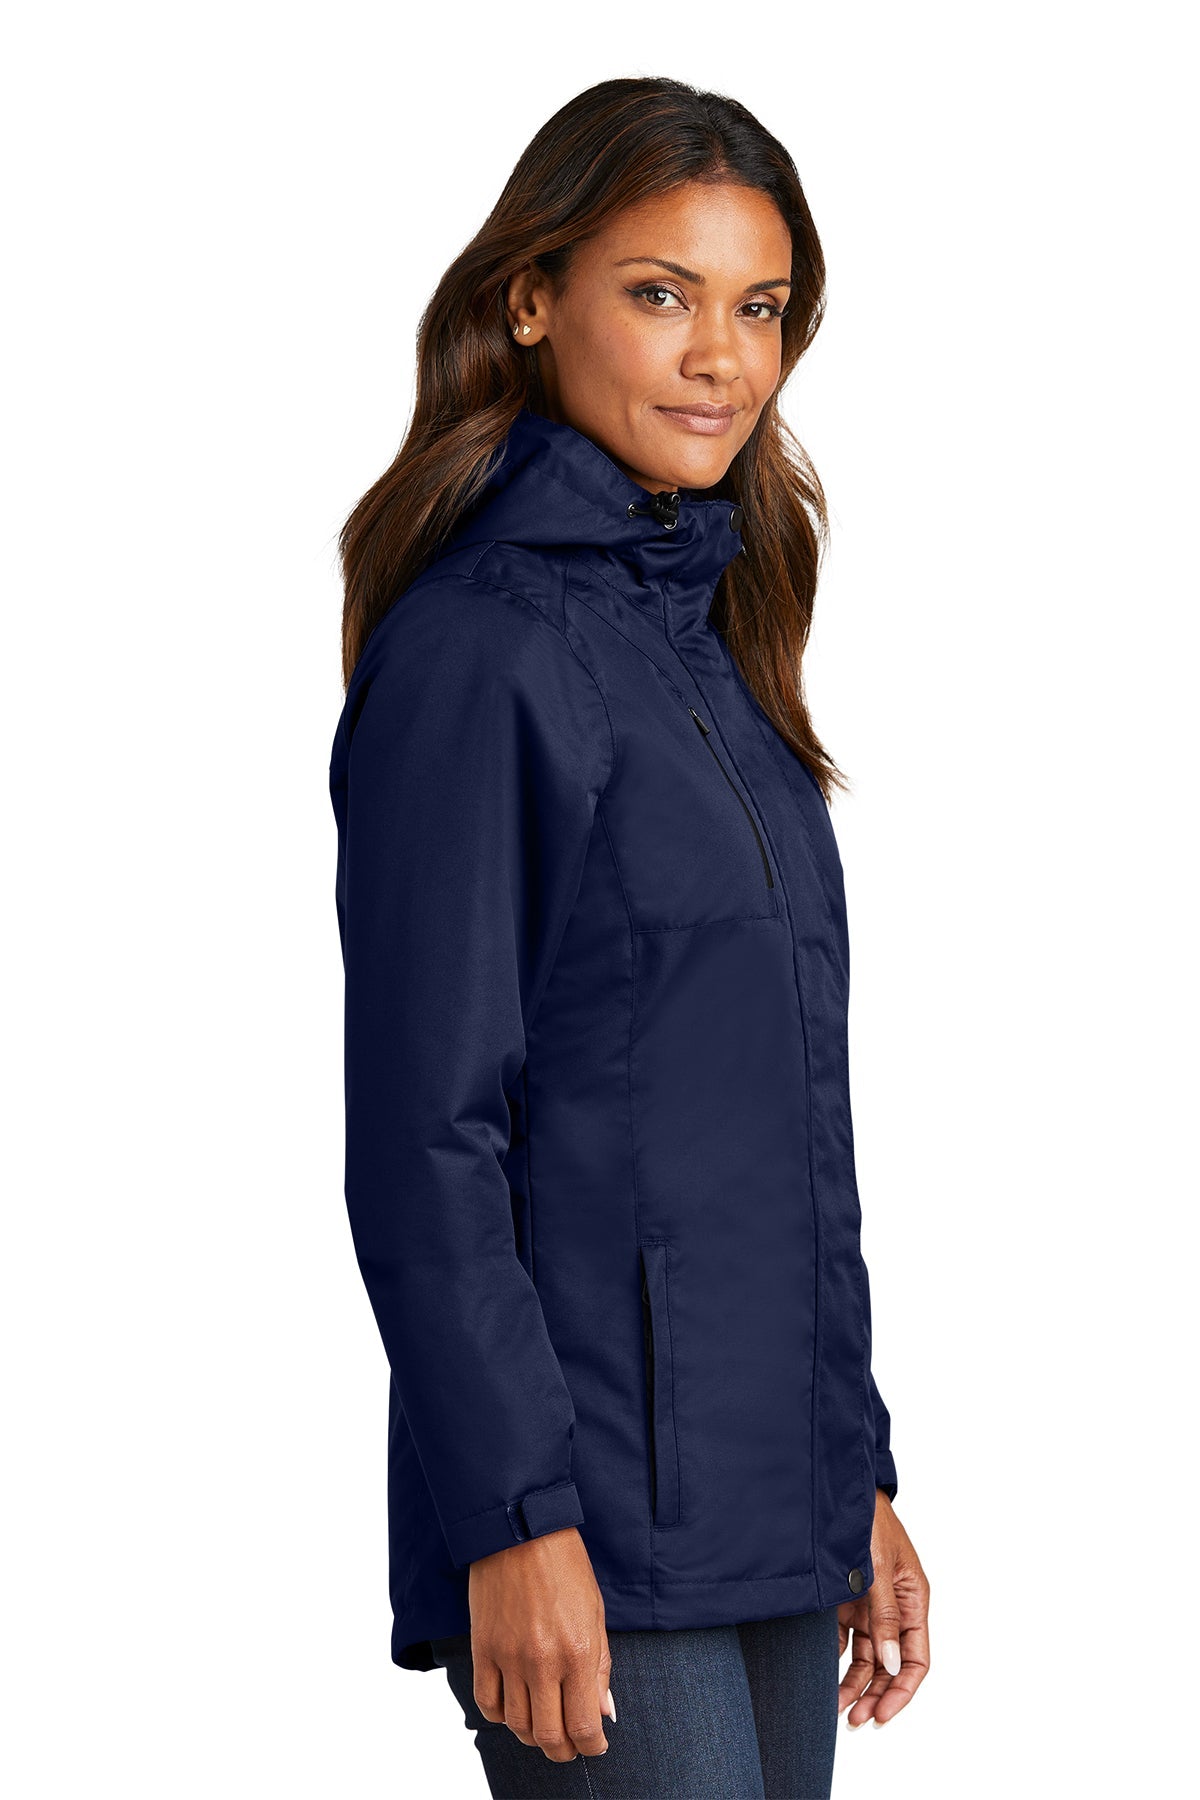 Port Authority Ladies All-Conditions Branded Jackets, True Navy